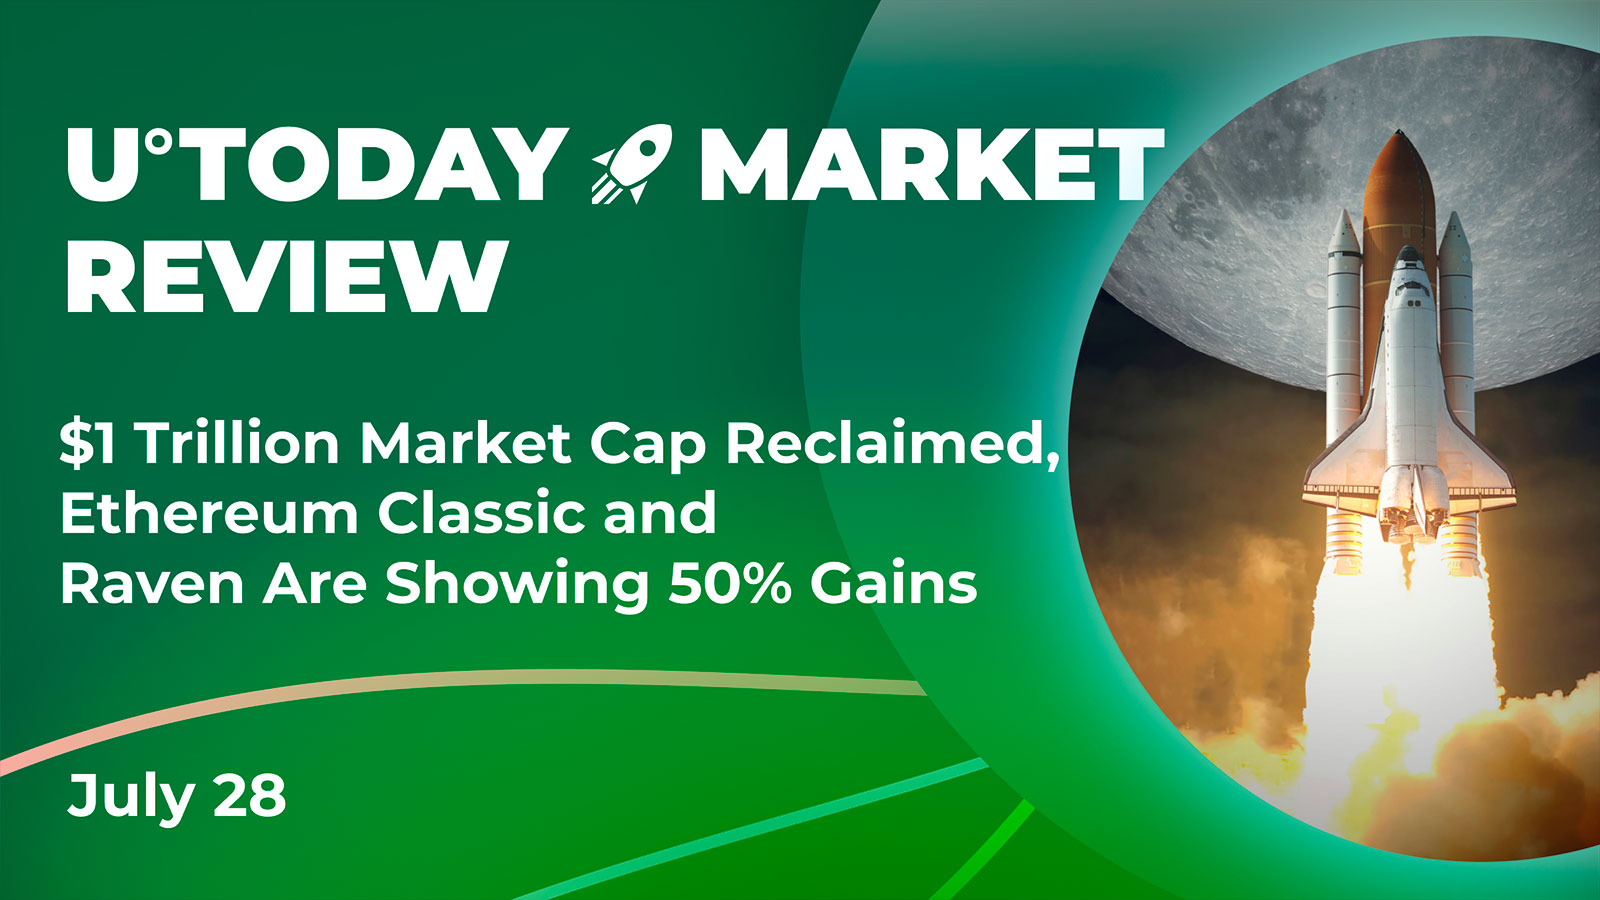 $1 Trillion Market Cap Reclaimed, Ethereum Classic and Raven Are Showing 50% Gains: Crypto Market Review, July 29